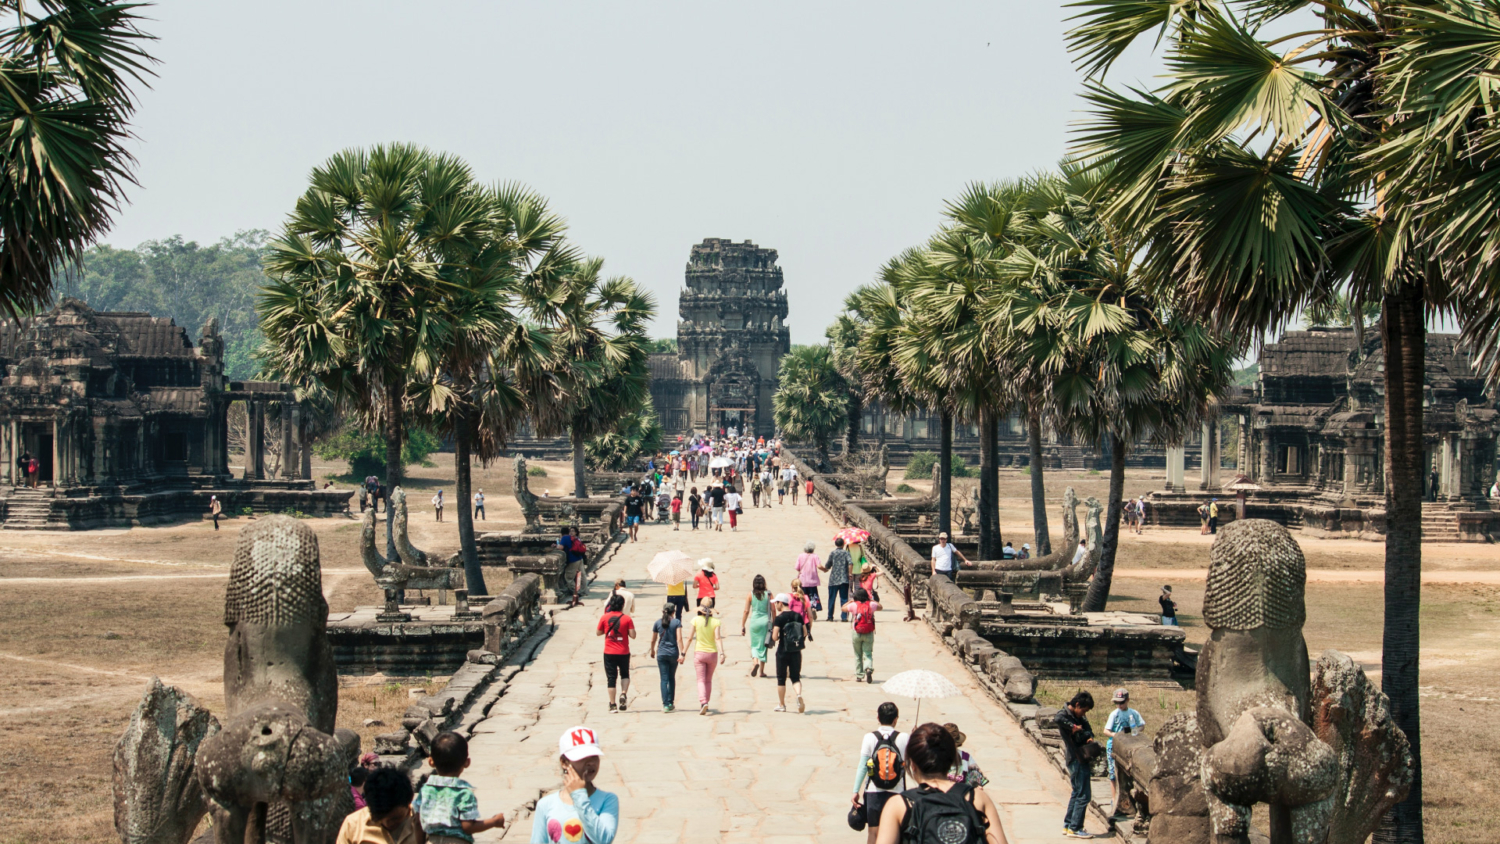 Siem Reap 5 Day Tourist Itinerary + Recommendations